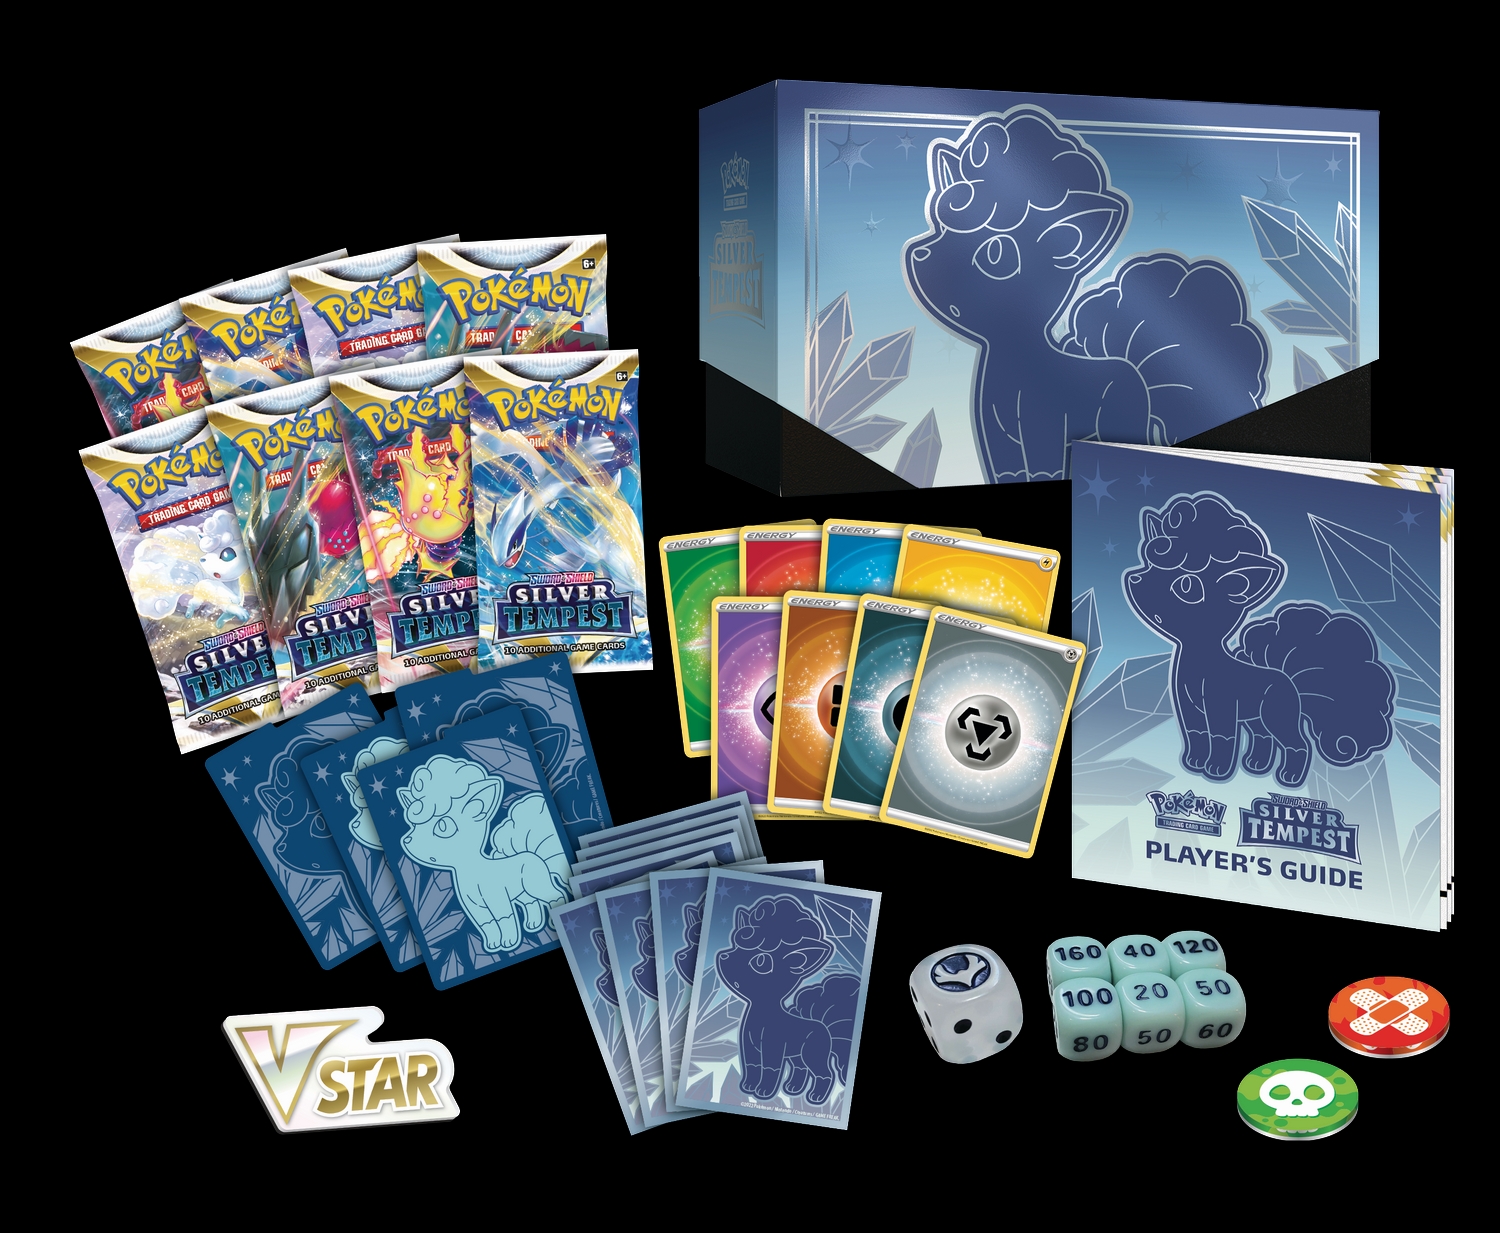 Pokemon_TCG_Sword_Shield—Silver_Tempest_Elite_Trainer_Box_(with_components).jpg